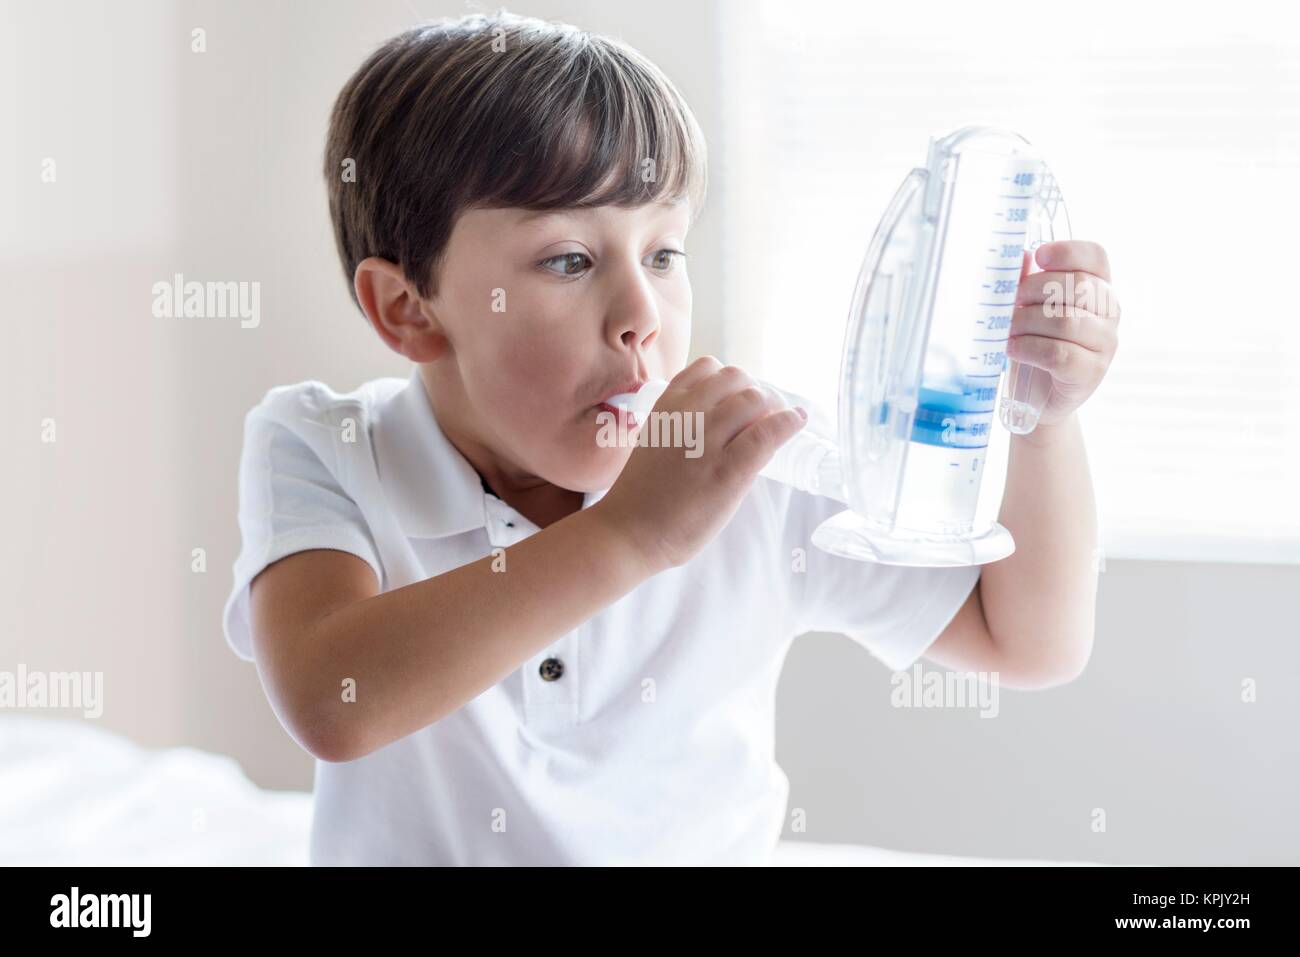 Young boy using breathing equipment. Stock Photo